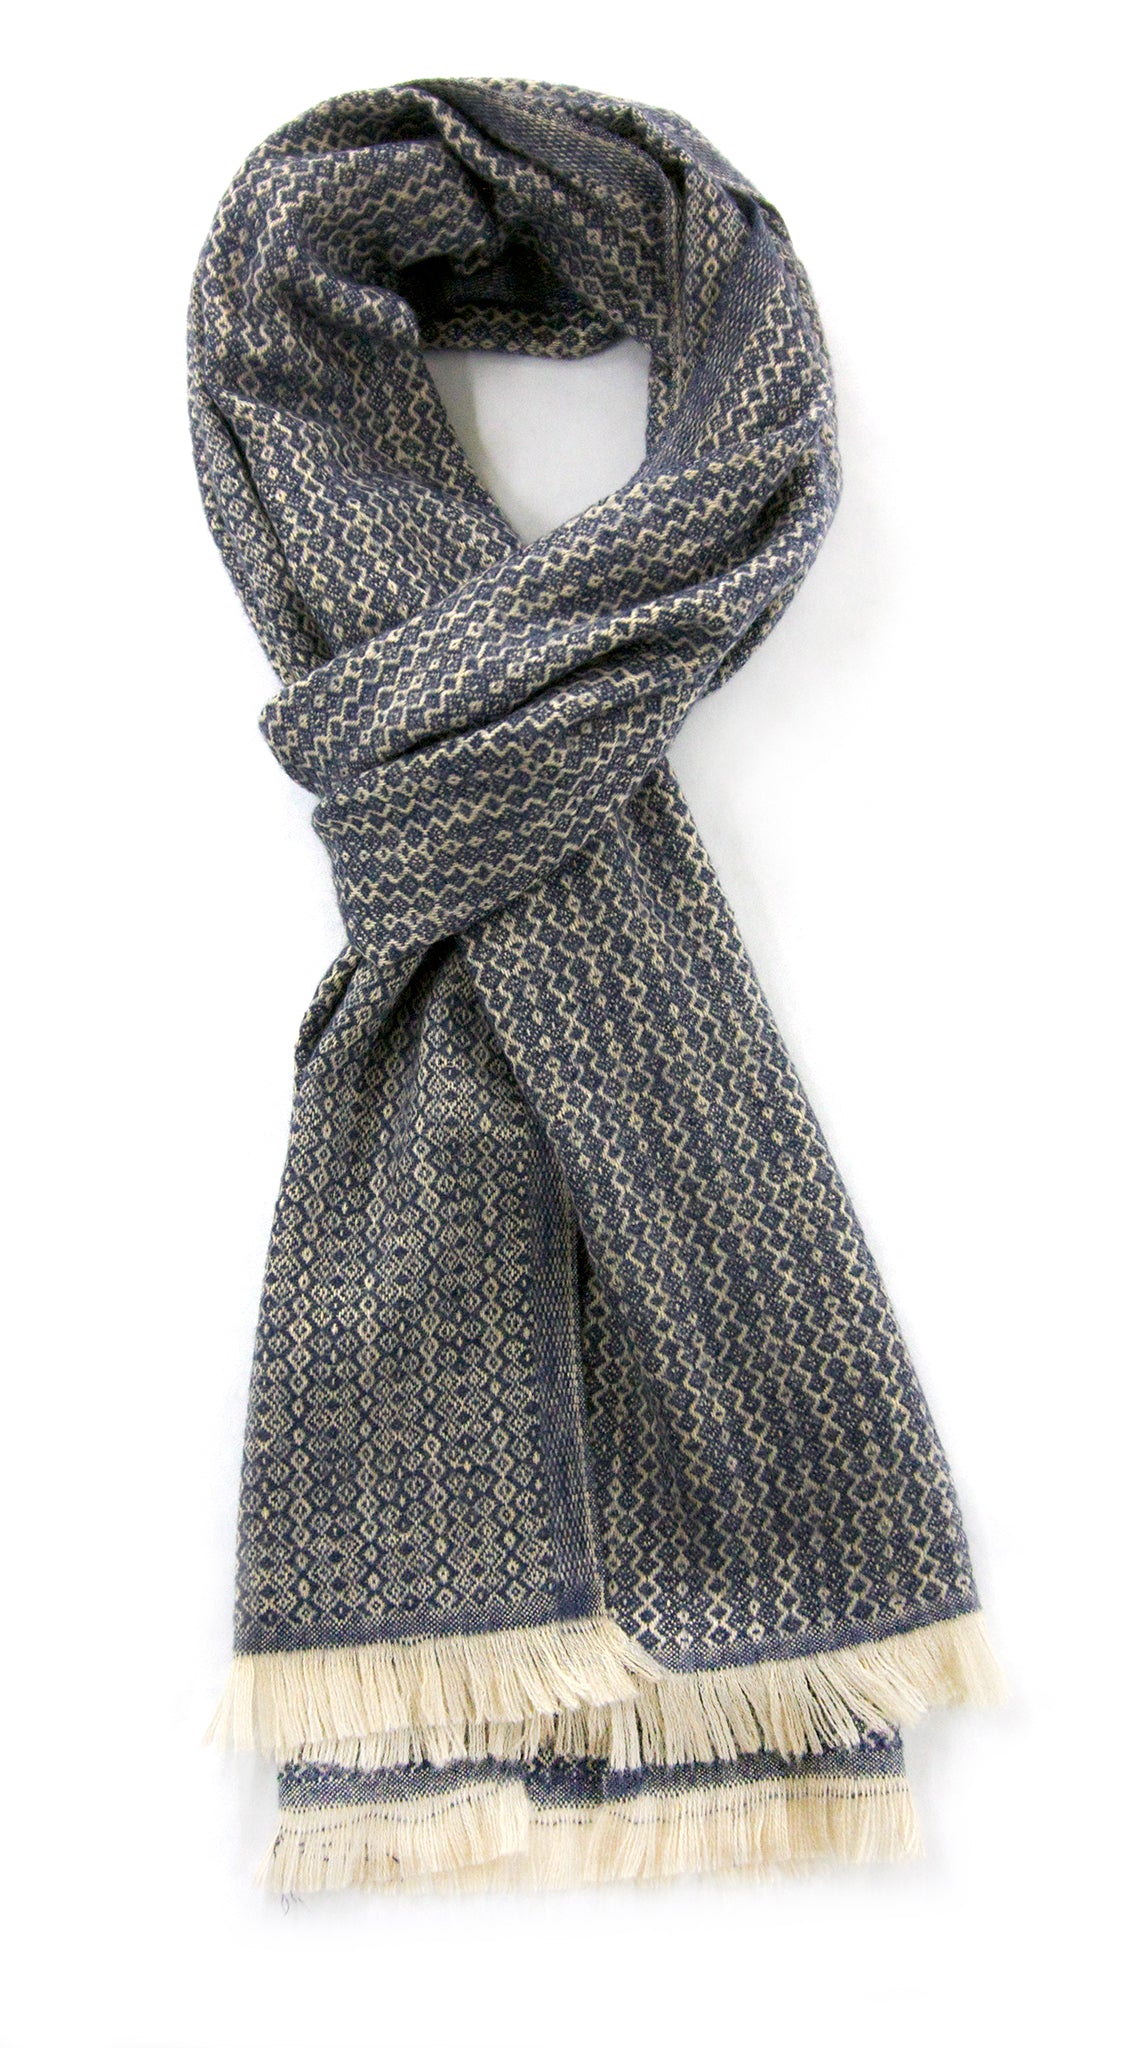 Soft cashmere blend scarf with fine diamond pattern in blue and off white - Marie-Pierre Rousseau